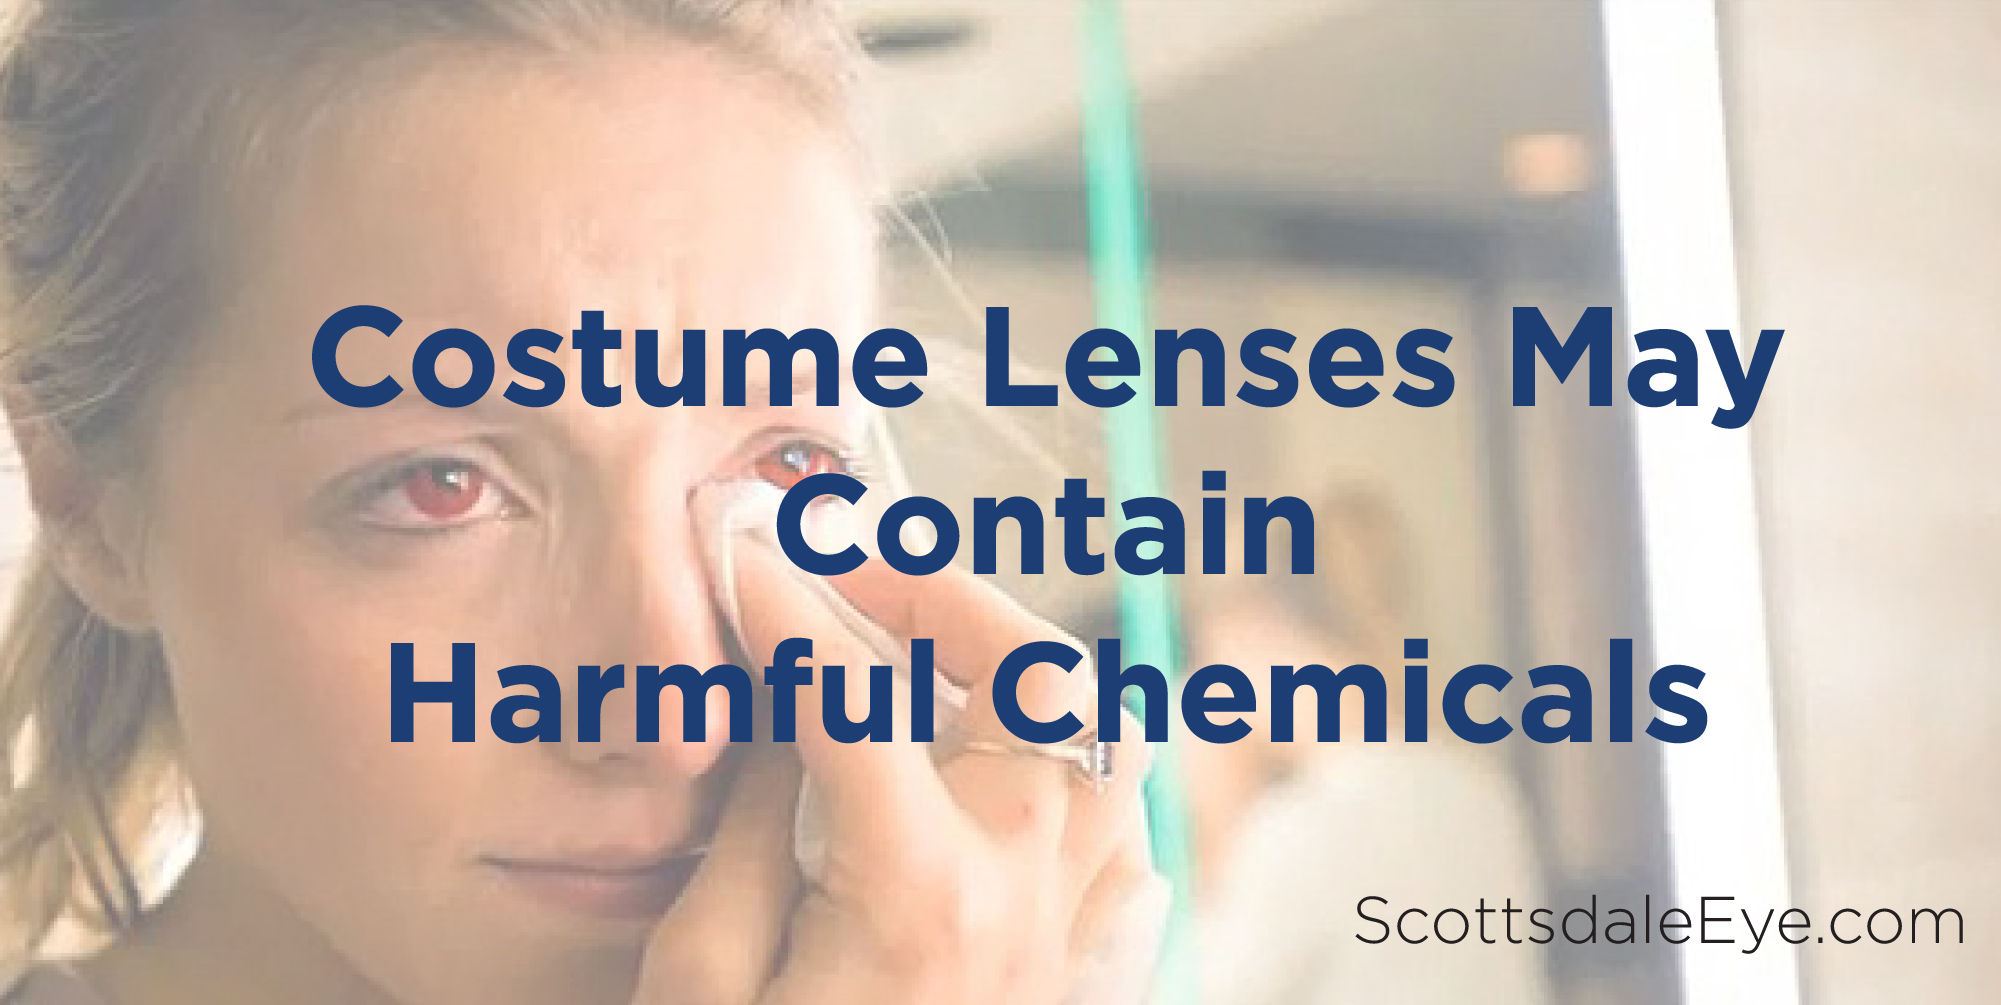 Halloween Warning: Costume Contact Lenses Could Contain Harmful Chemicals